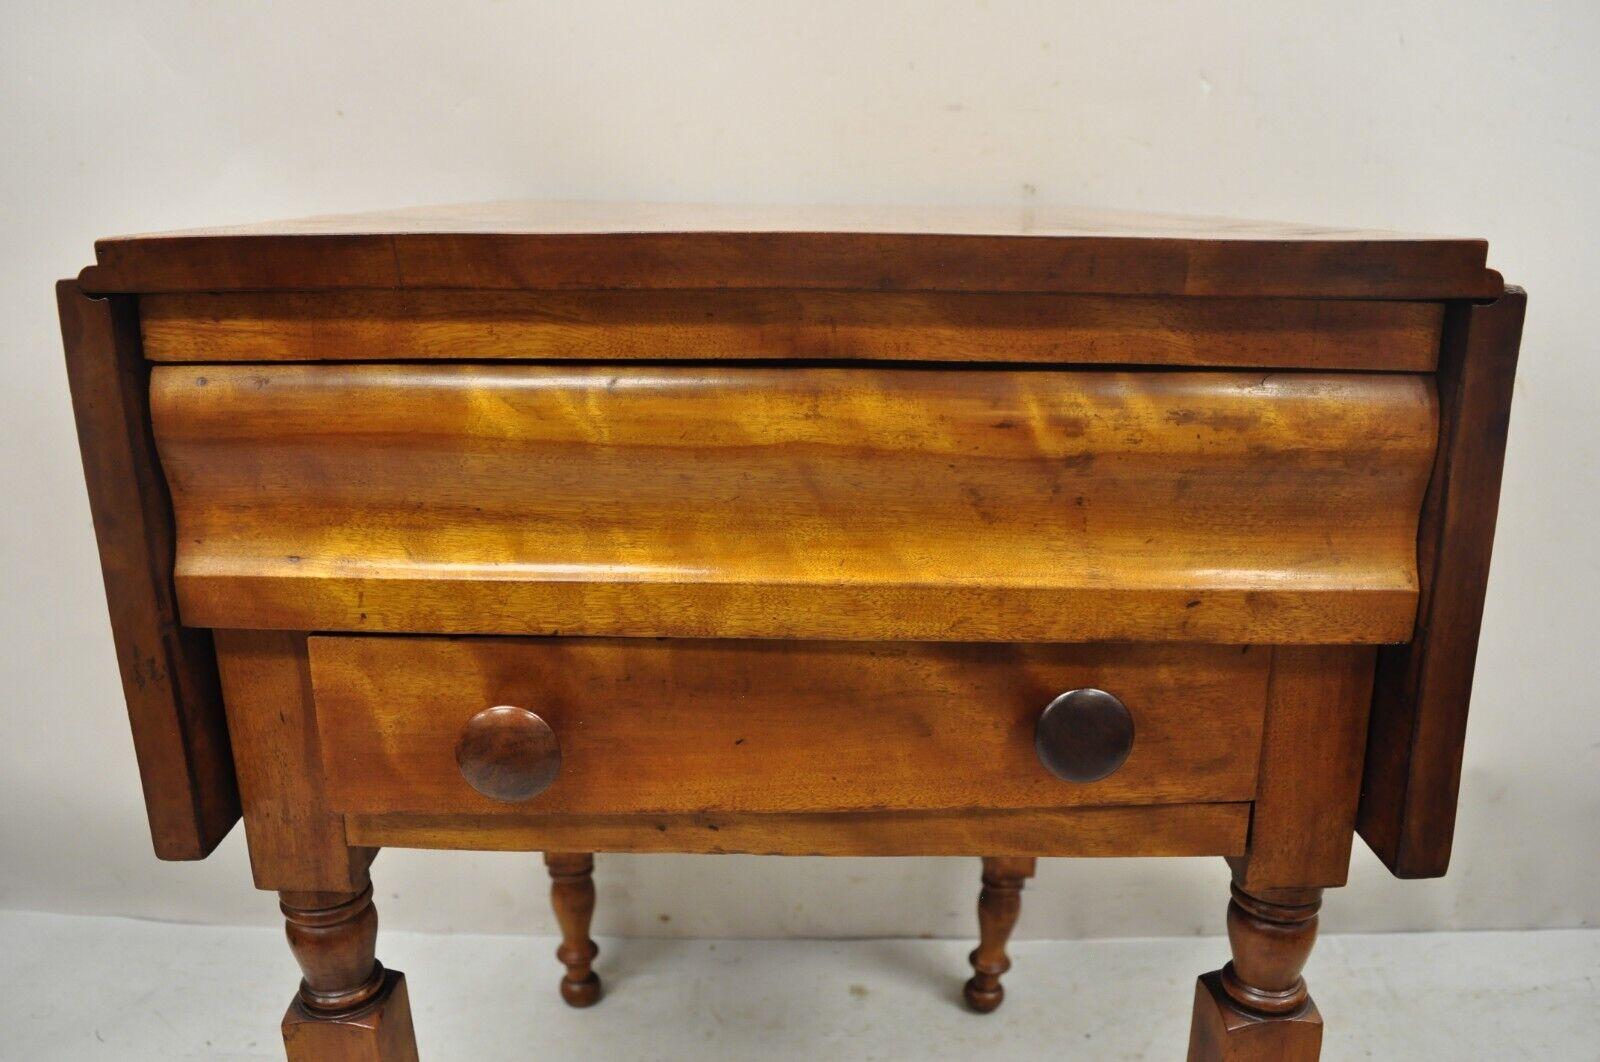 Antique Victorian Chestnut Drop Leaf Work Table Side Table with 2 Drawers For Sale 4